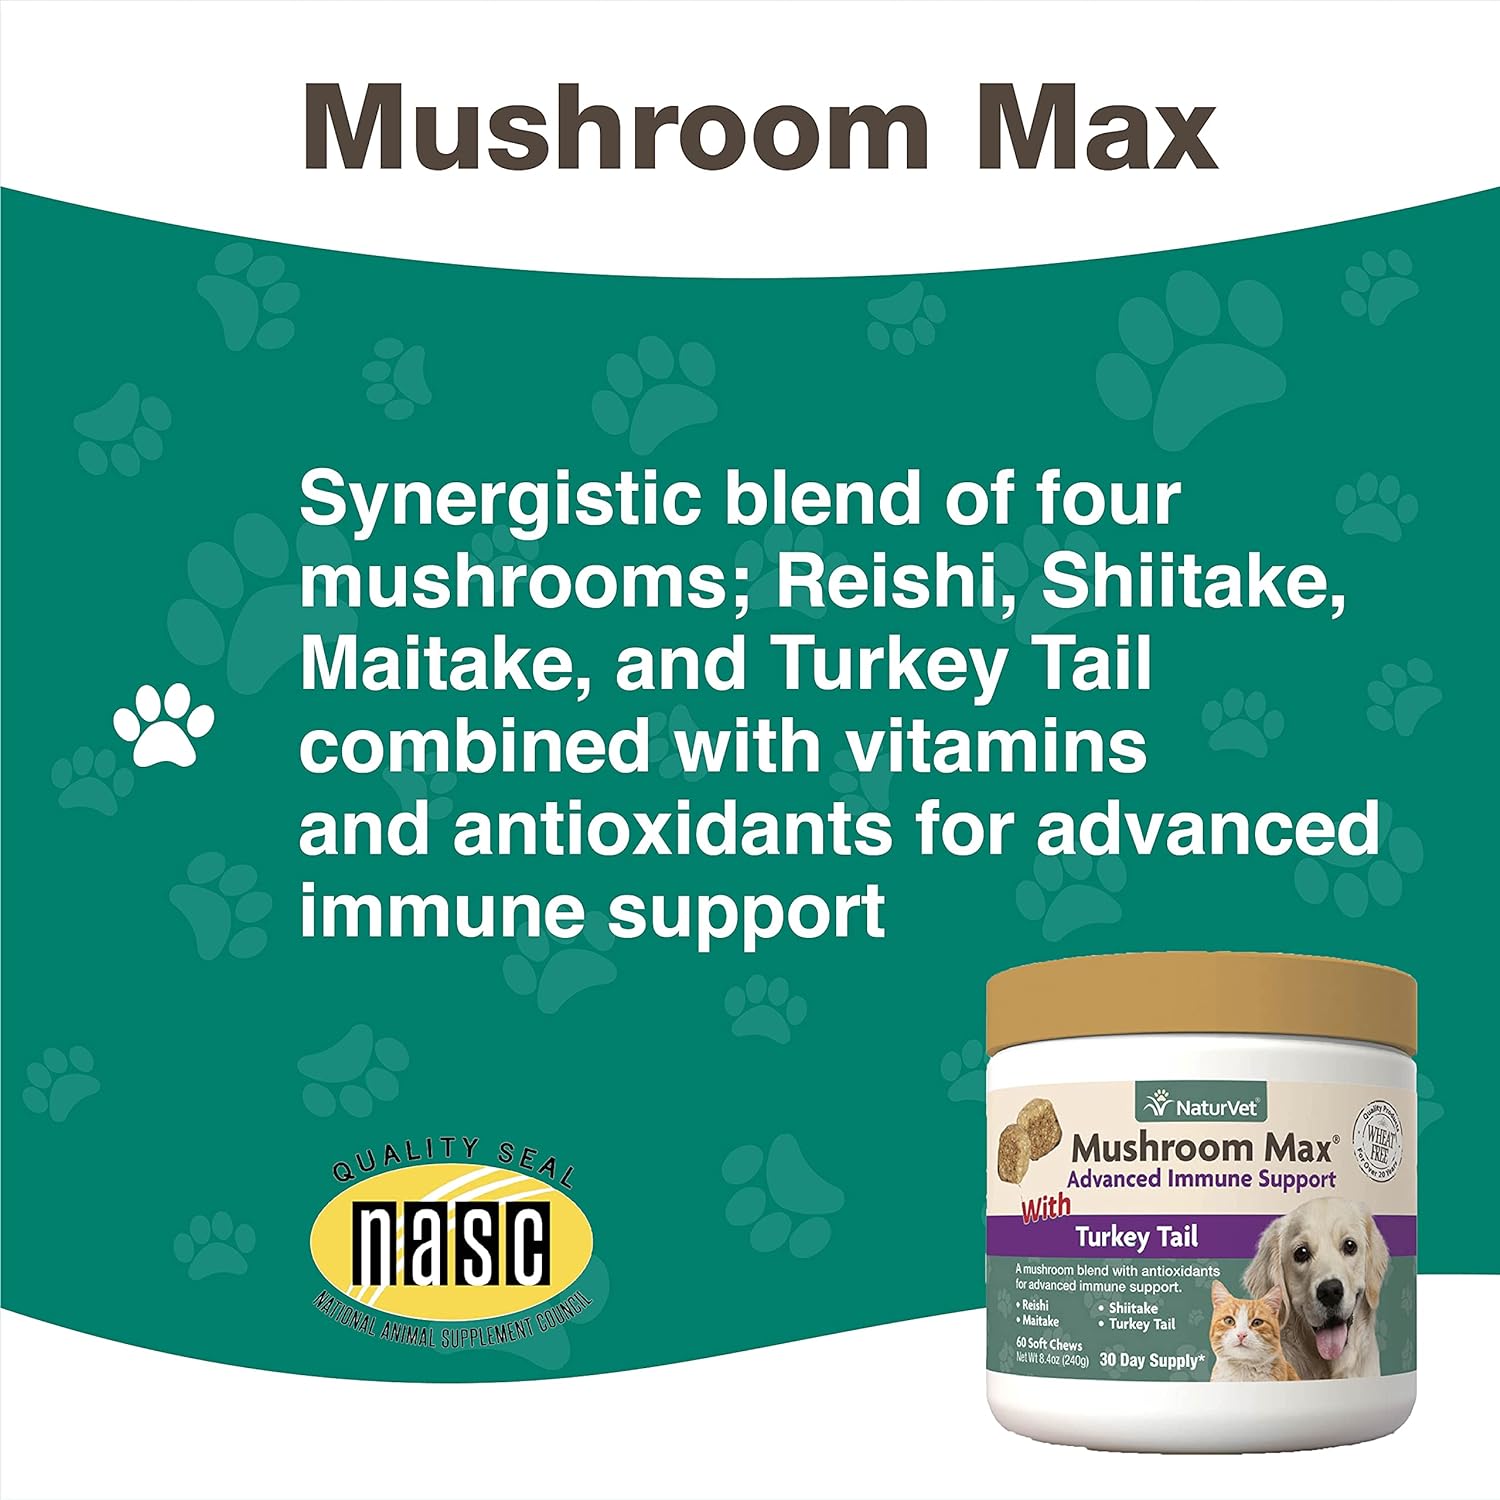 NaturVet Mushroom Max Advanced Immune Support Dog Supplement – Helps Strengthen Immunity, Overall Health for Dogs – Includes Shitake Mushrooms, Reishi, Turkey Tail – 60 Ct. : Pet Supplies